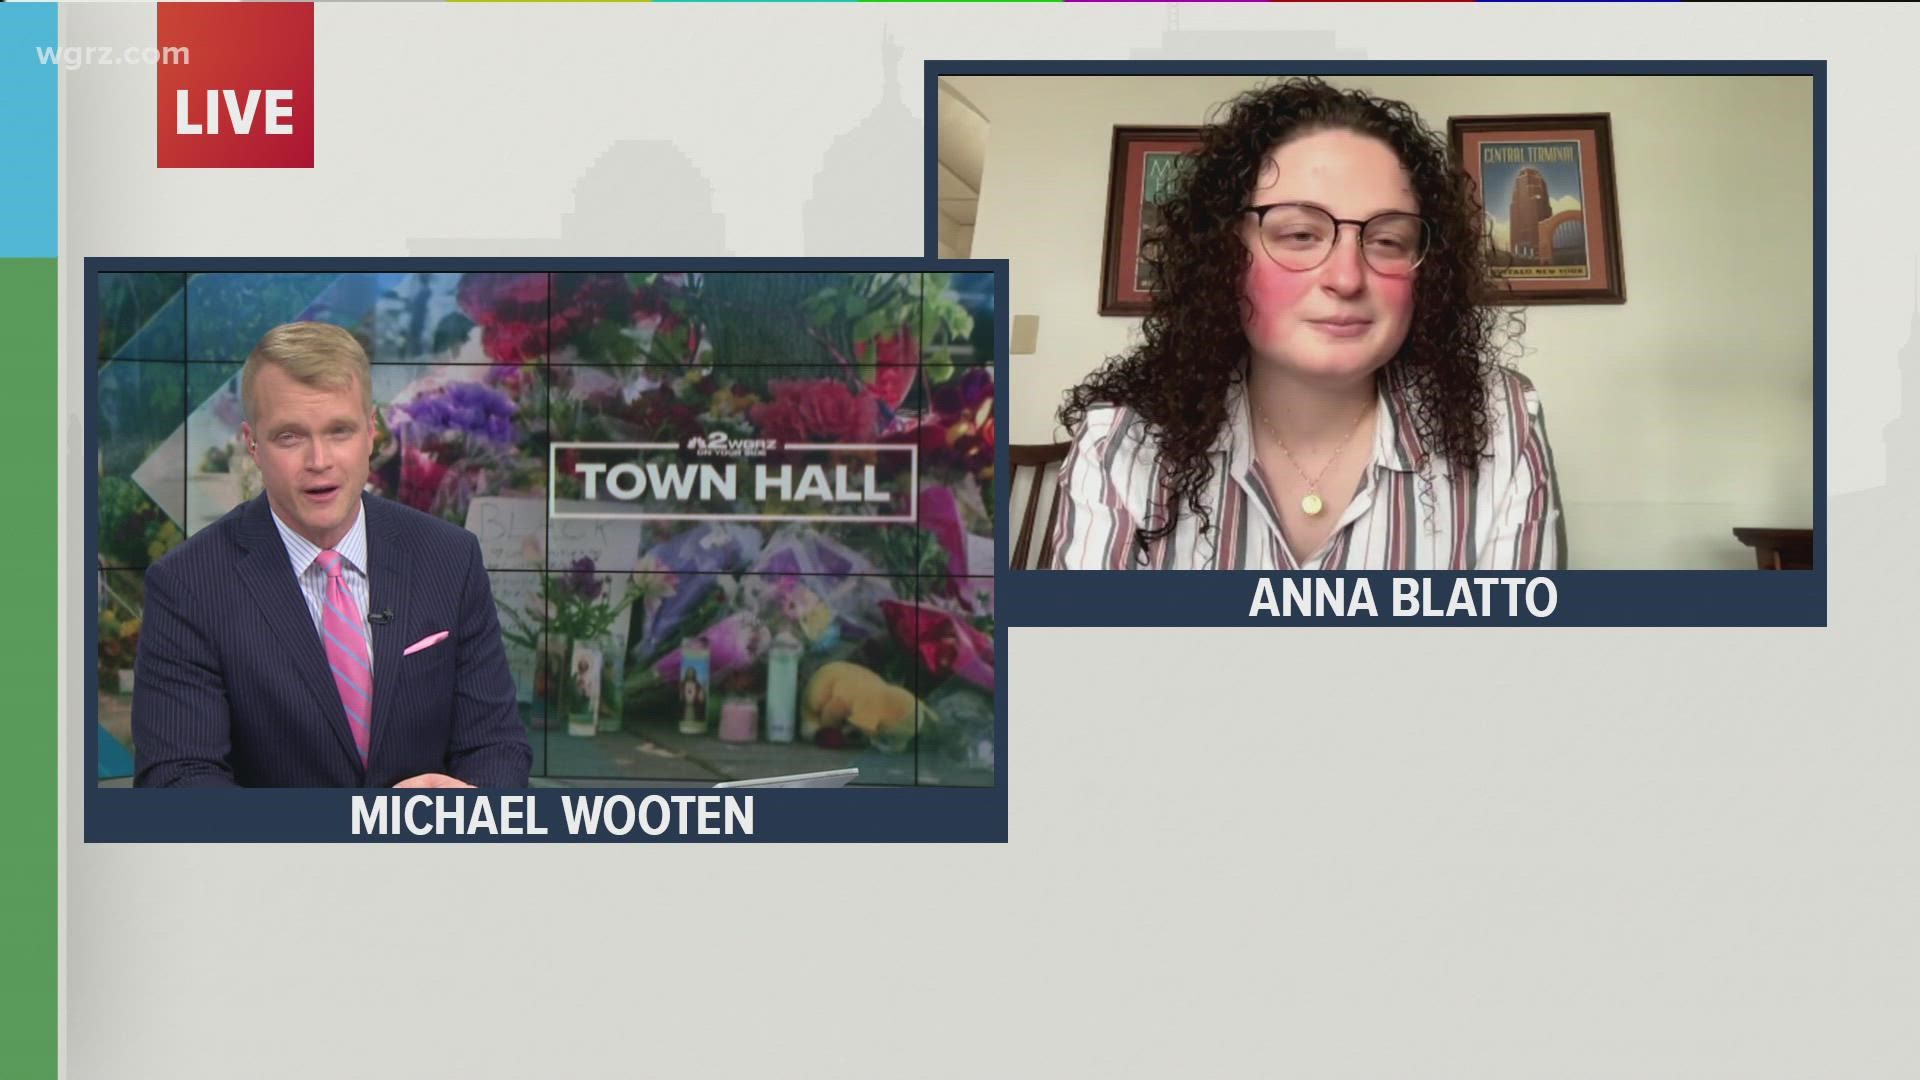 Anna  Blatto, a researcher at the Partnership for the Public Good, joined the Town hall to discuss how Buffalo is segregated.